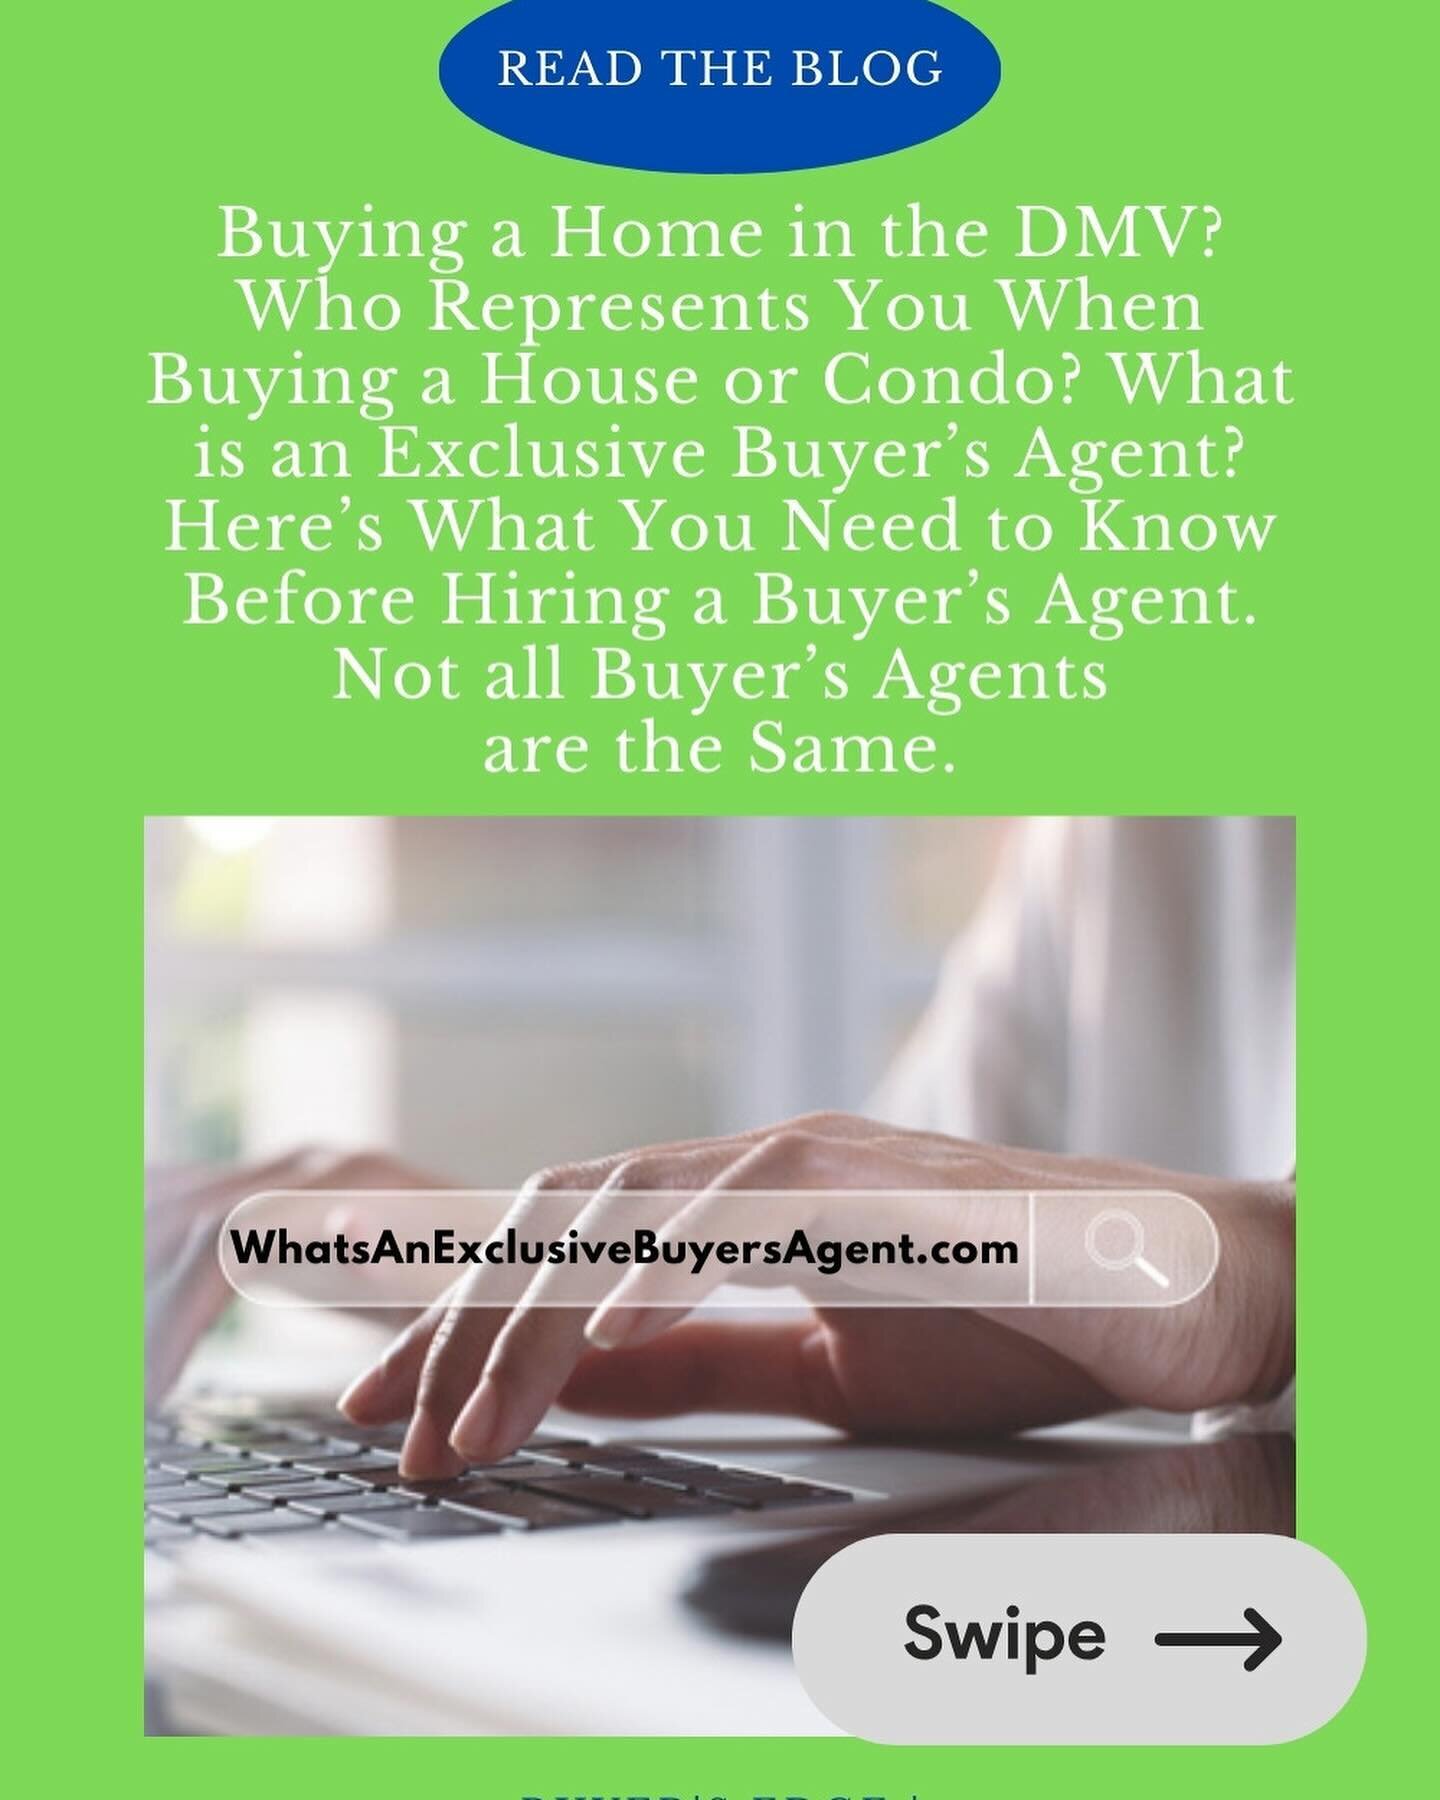 Buying a Home in the DMV?
Who Represents You When Buying a House or Condo? What is an Exclusive Buyer&rsquo;s Agent?
Here&rsquo;s What You Need to Know Before Hiring a Buyer&rsquo;s Agent.
Not all Buyer&rsquo;s Agents are the Same. 

Are you embarkin